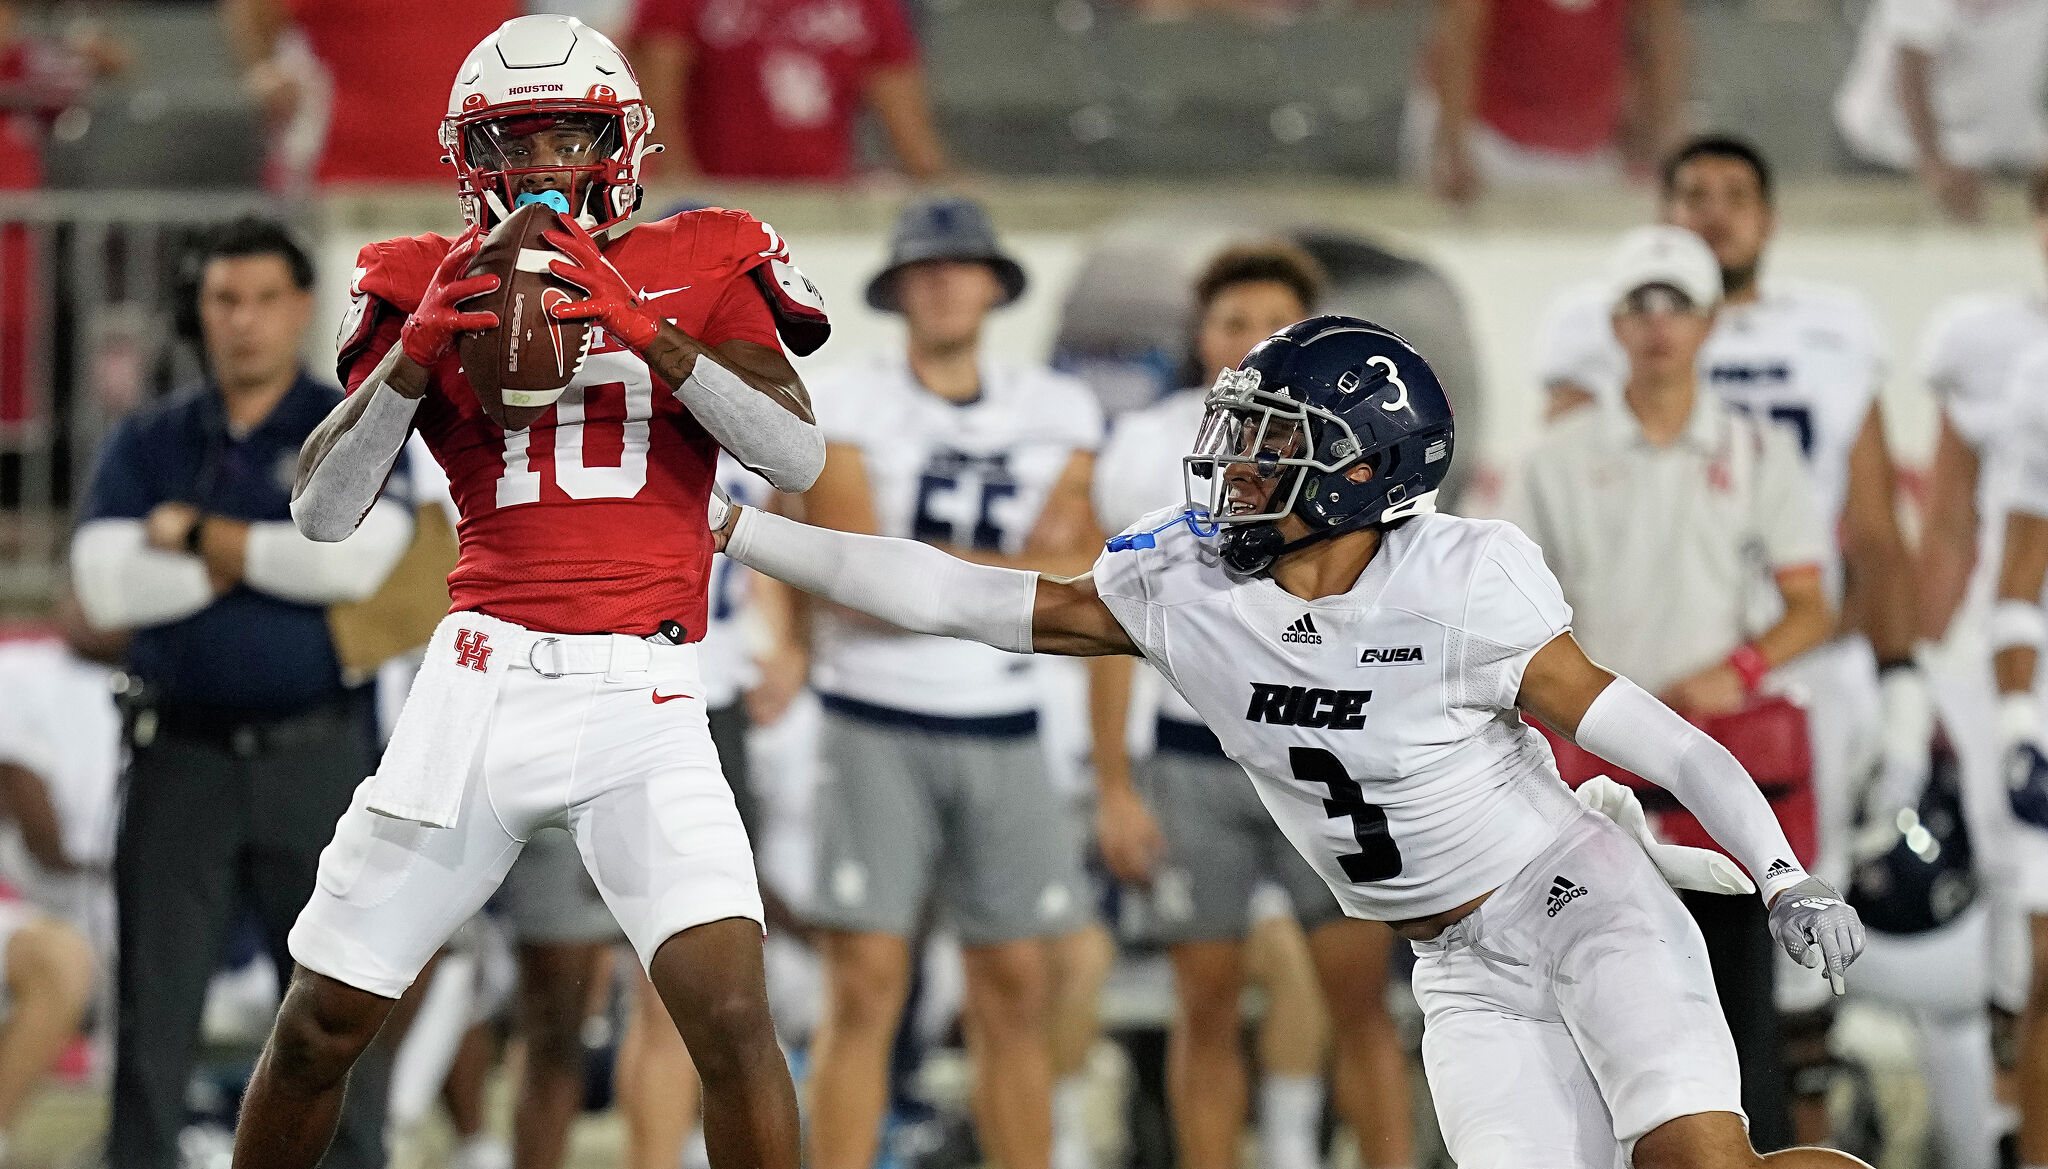 UH football vs. Rice 5 things to watch in Bayou Bucket